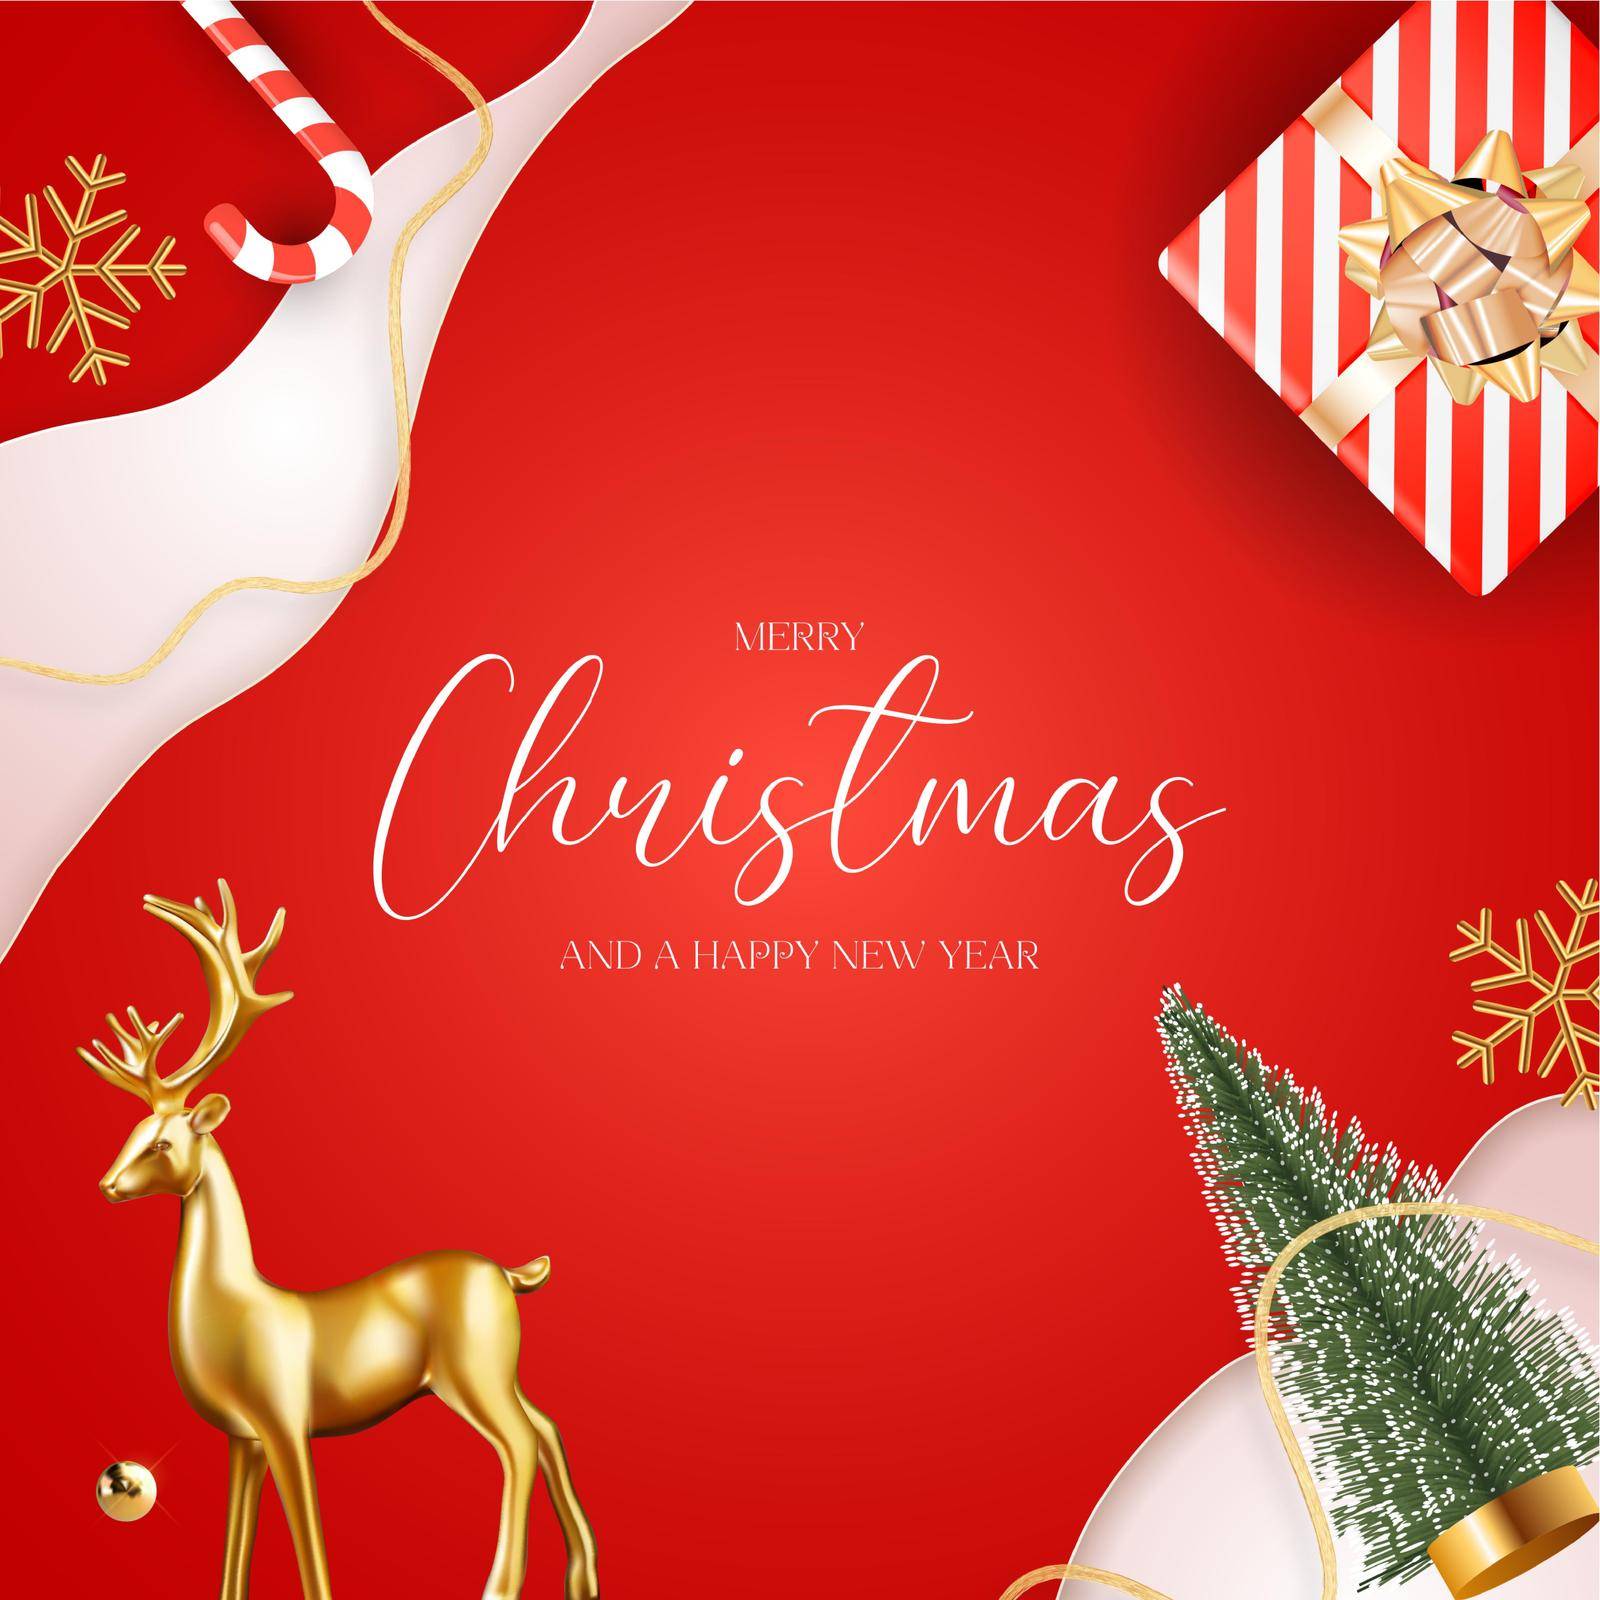 Merry Christmas and Happy New Year Greeting Card.